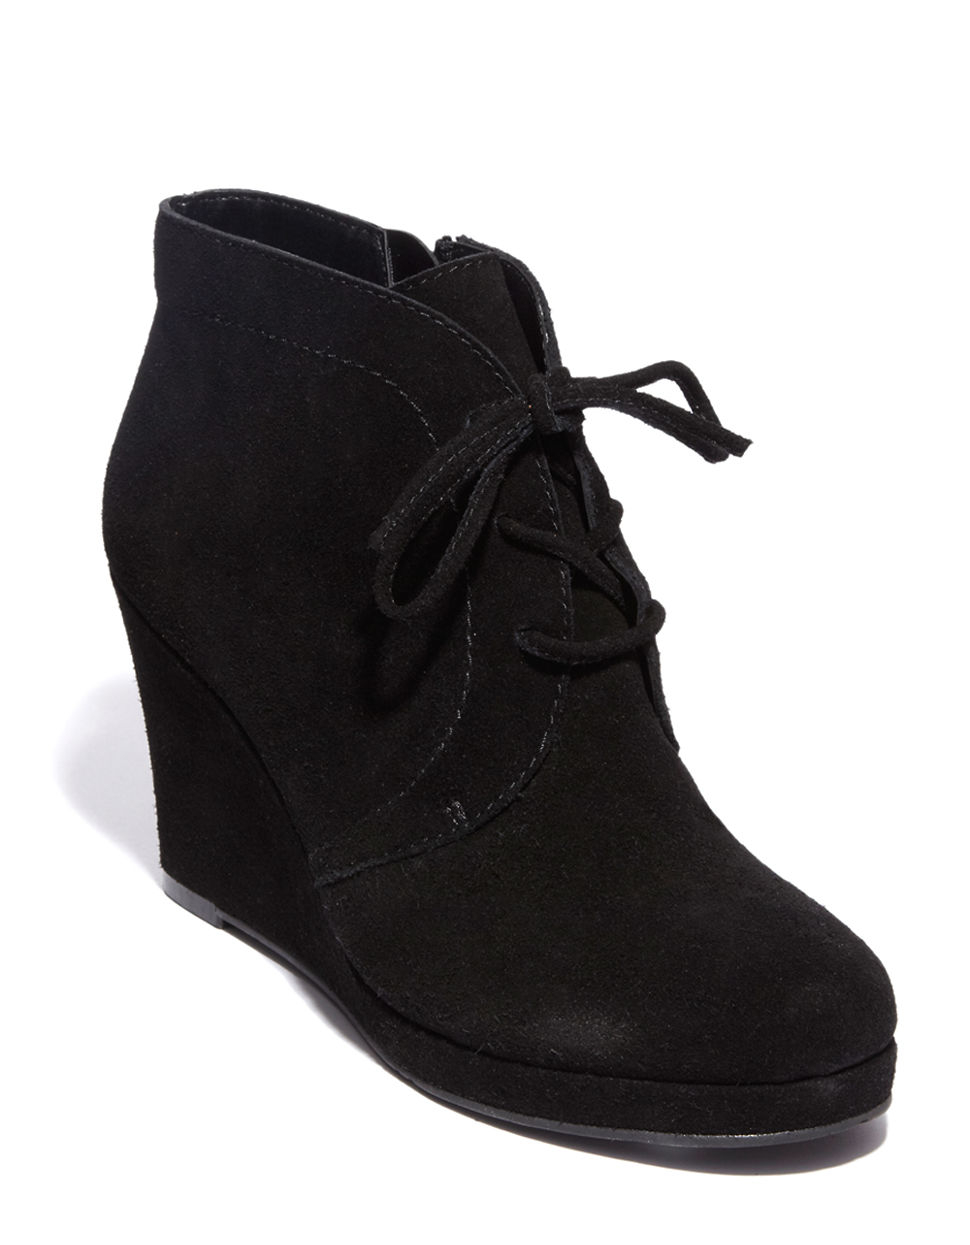 Dv By Dolce Vita Pace Suede Wedge Booties in Black | Lyst